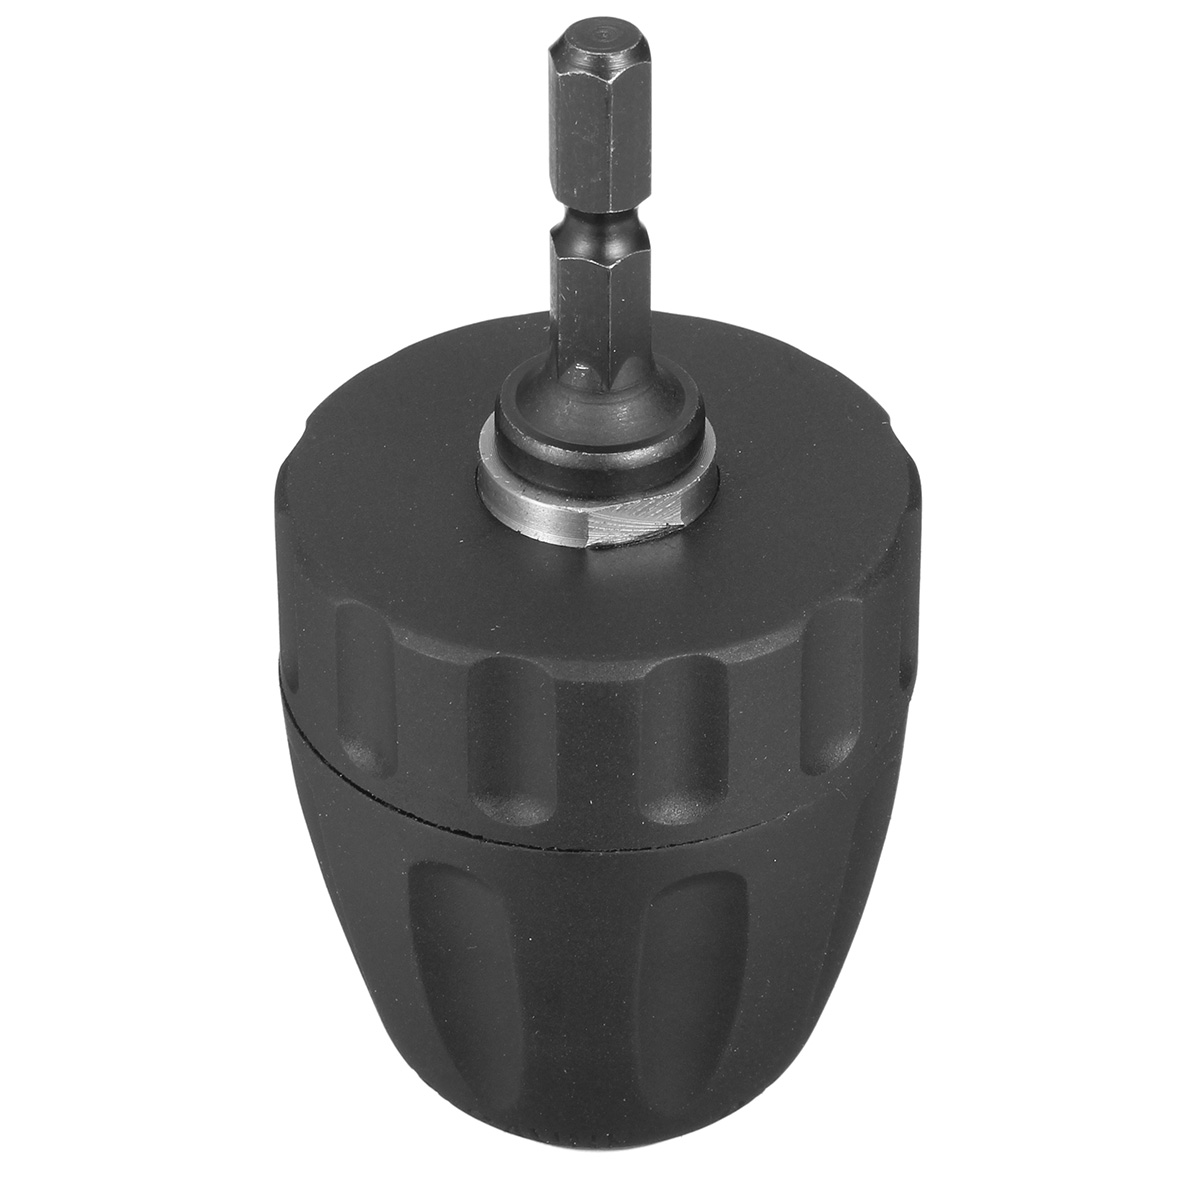 08-10mm-Keyless-Drill-Chuck-Converter-38-Inch-24UNF-with-14-Inch-Hex-Shank-SDS-Adapter-1160824-7